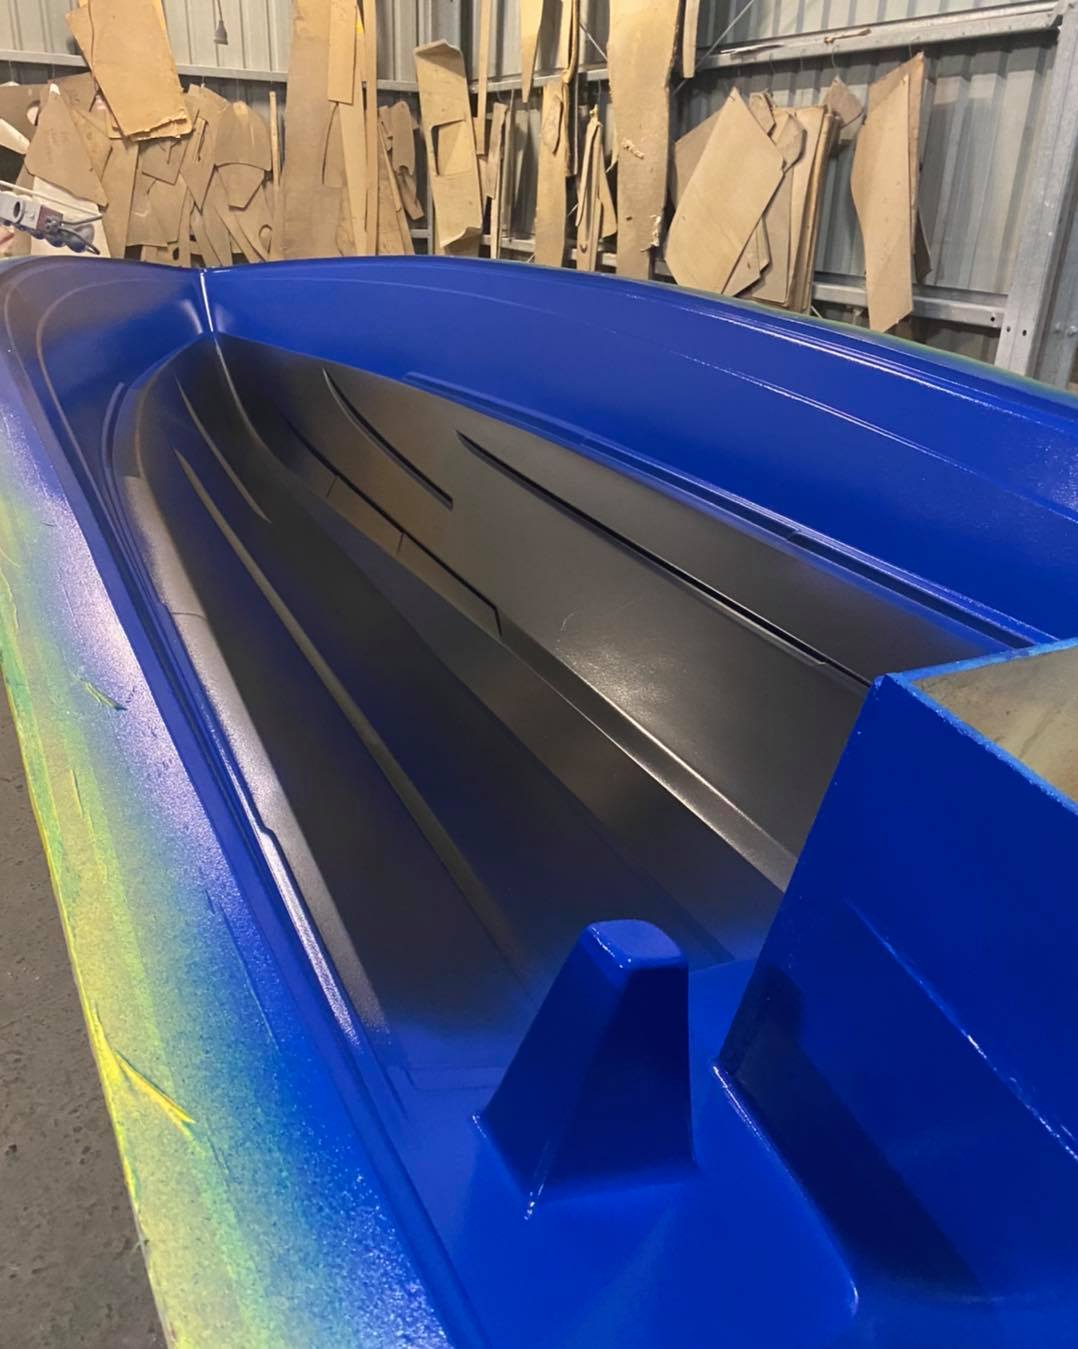 Looking super smart! Blue and black are the latest gelcoat colours to hit the mould for the lucky owner of this F25XS.